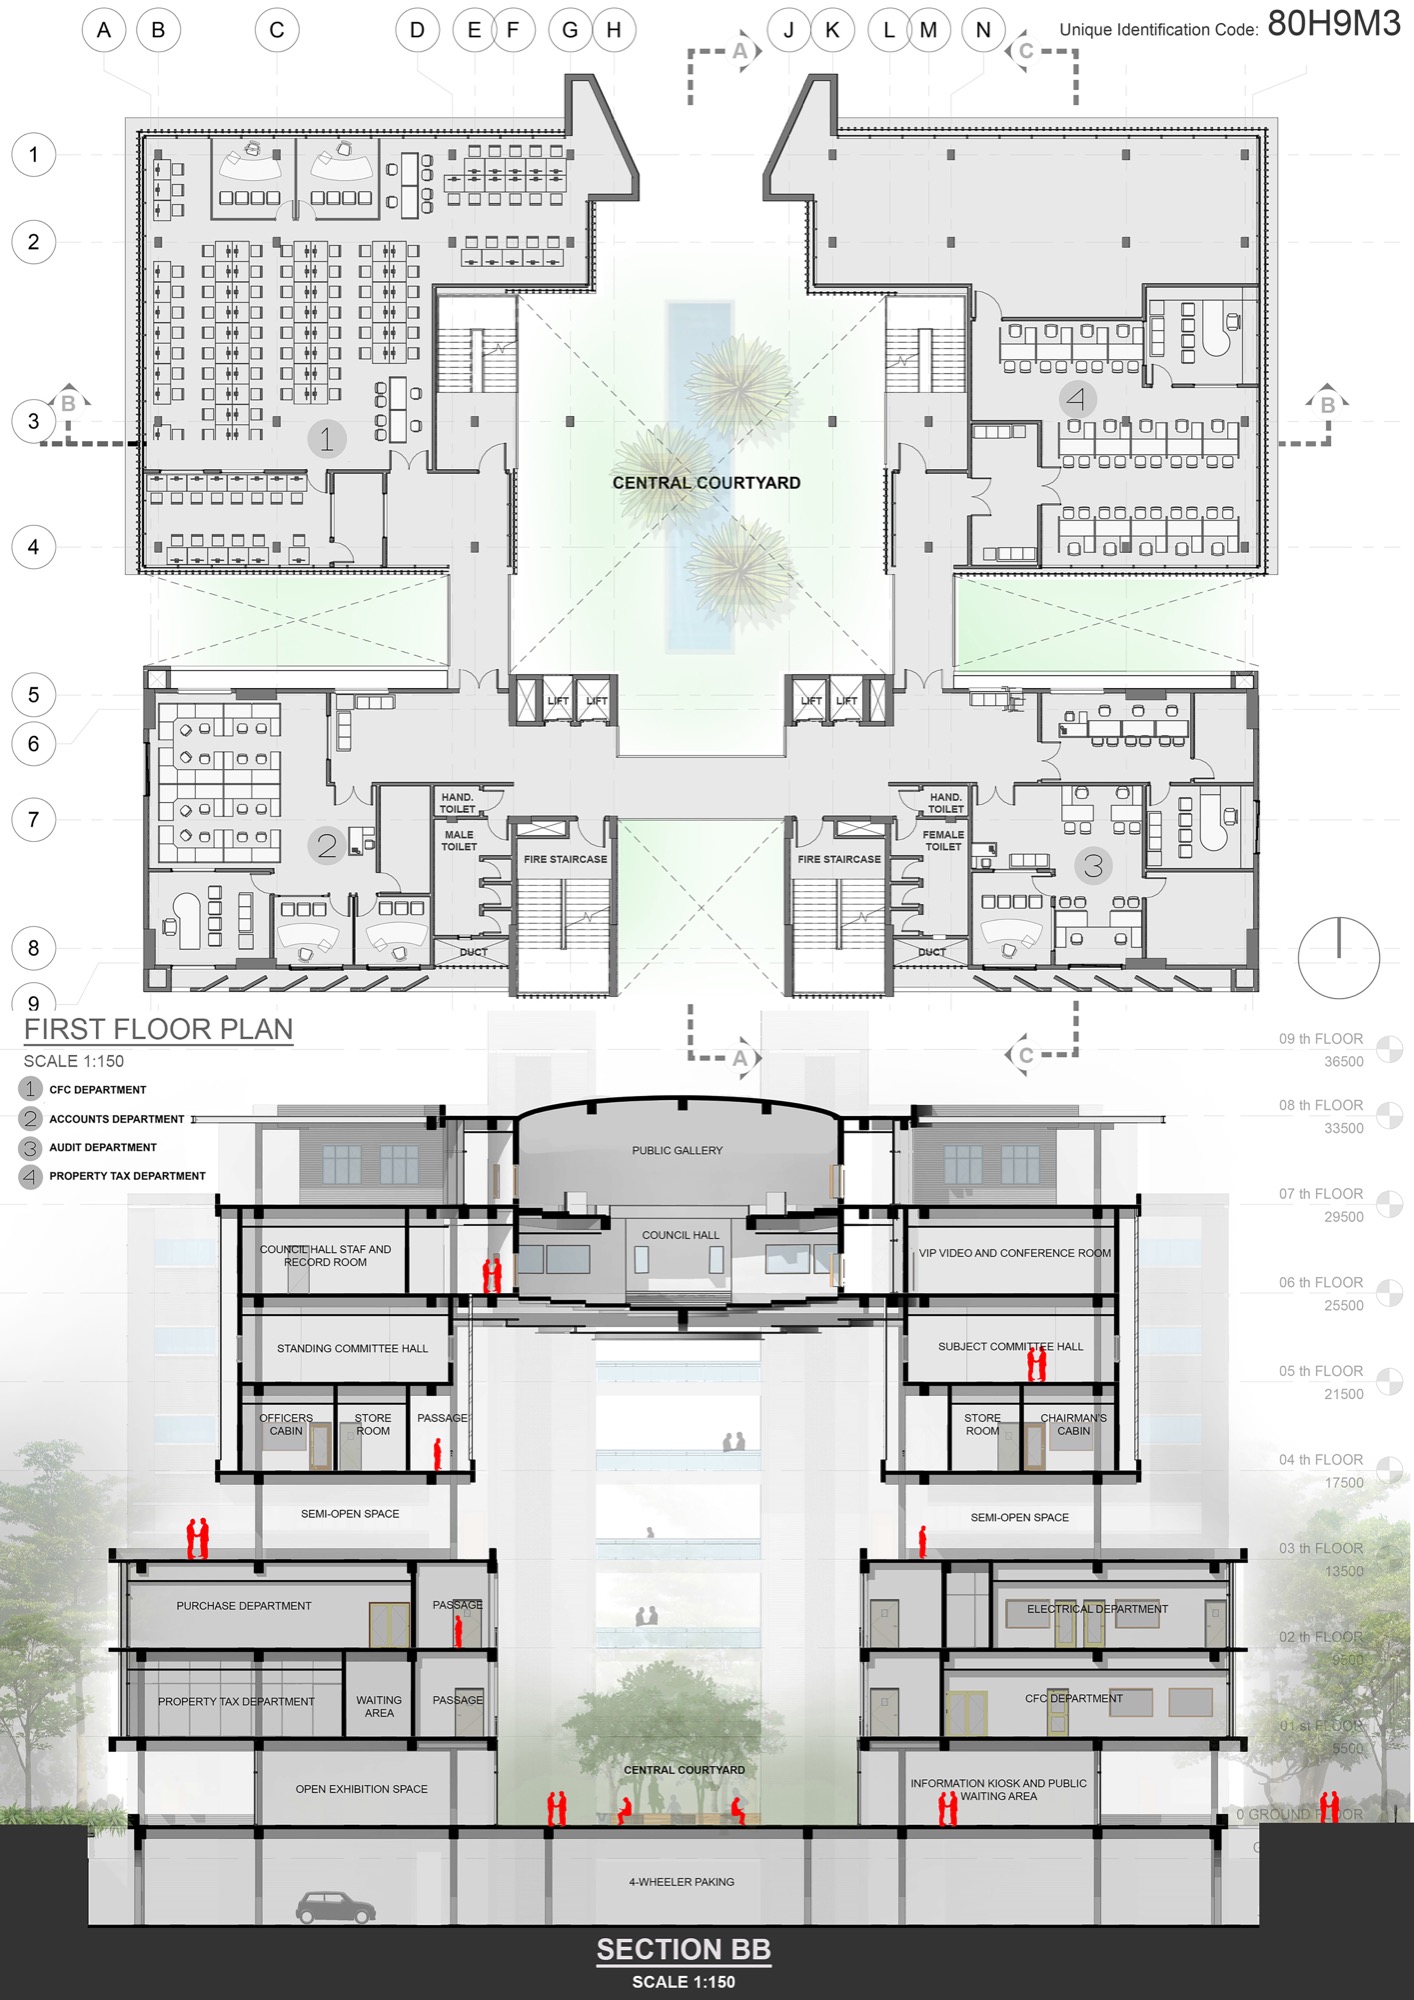 Satara Municipal Corporation, Shortlisted competition entry by Studio UD+AC 10